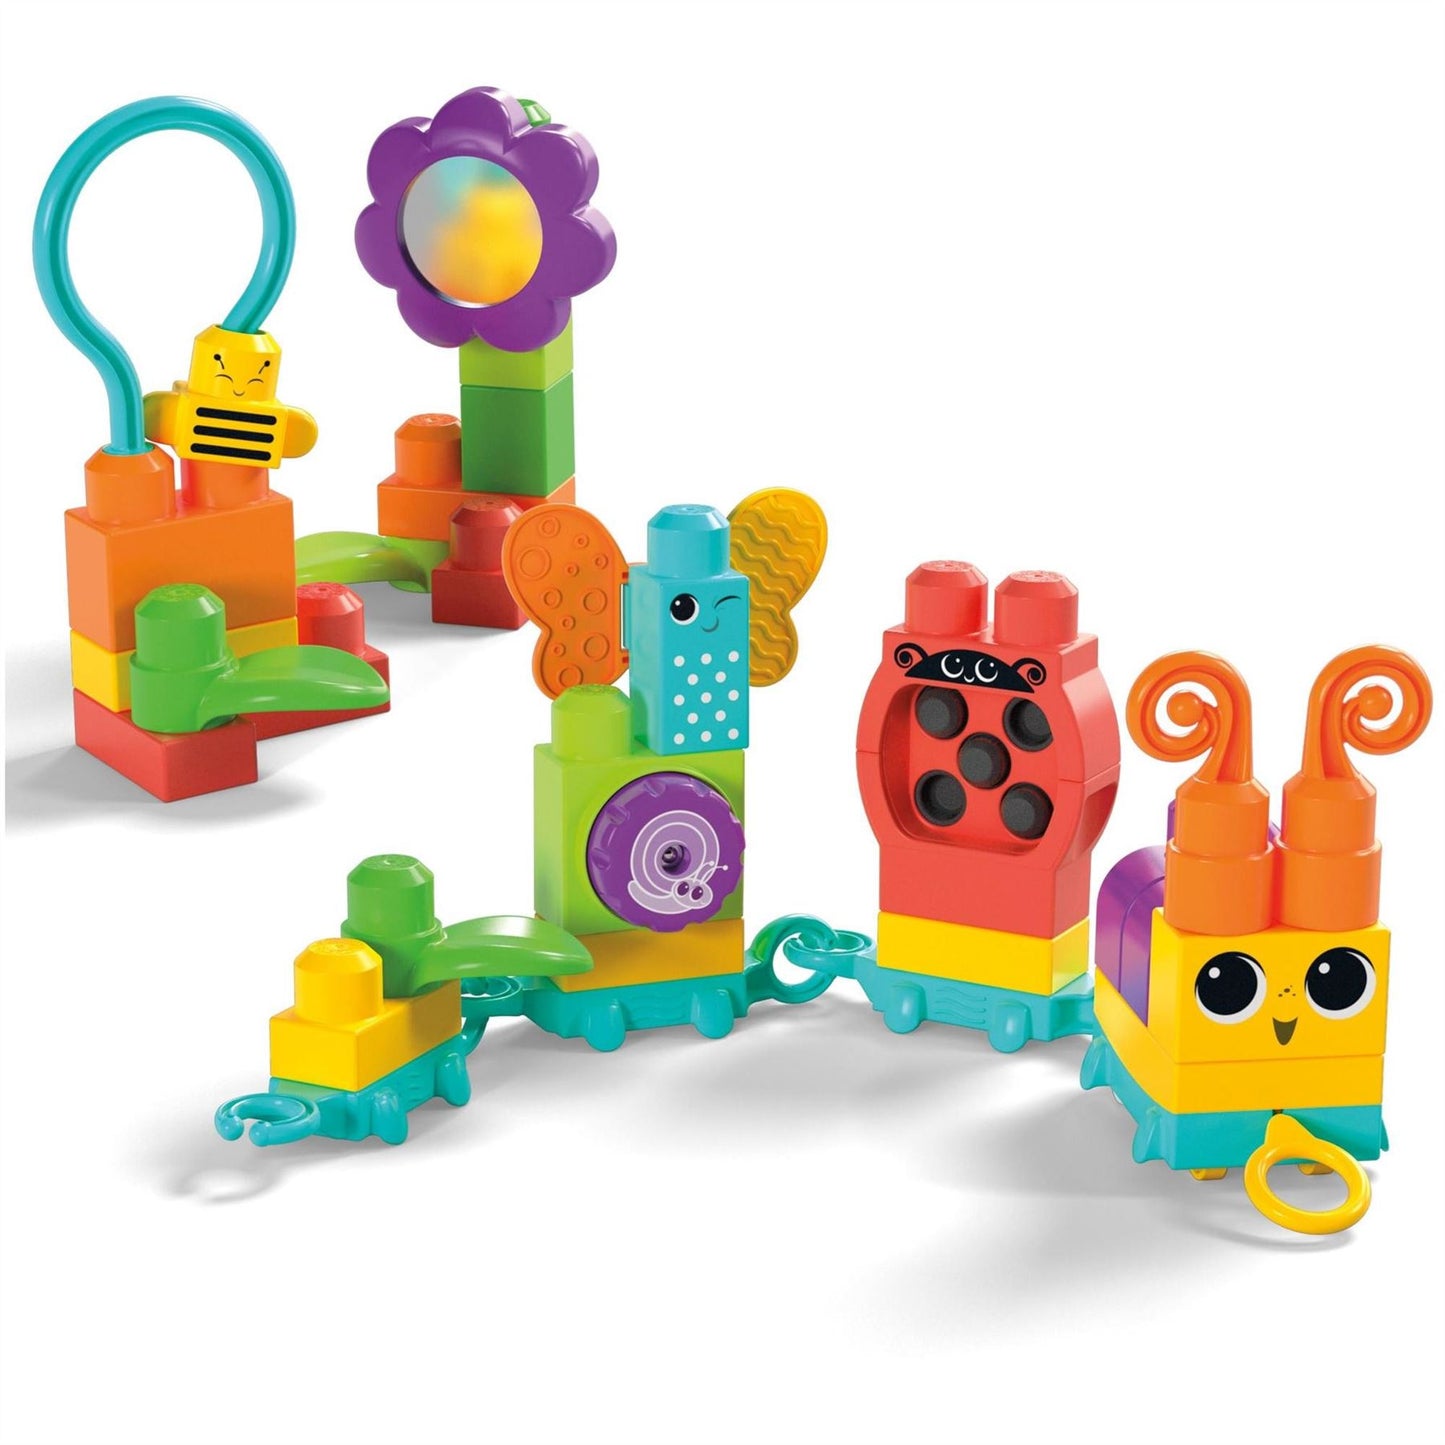 Move N Groove Caterpillar Sensory Toy